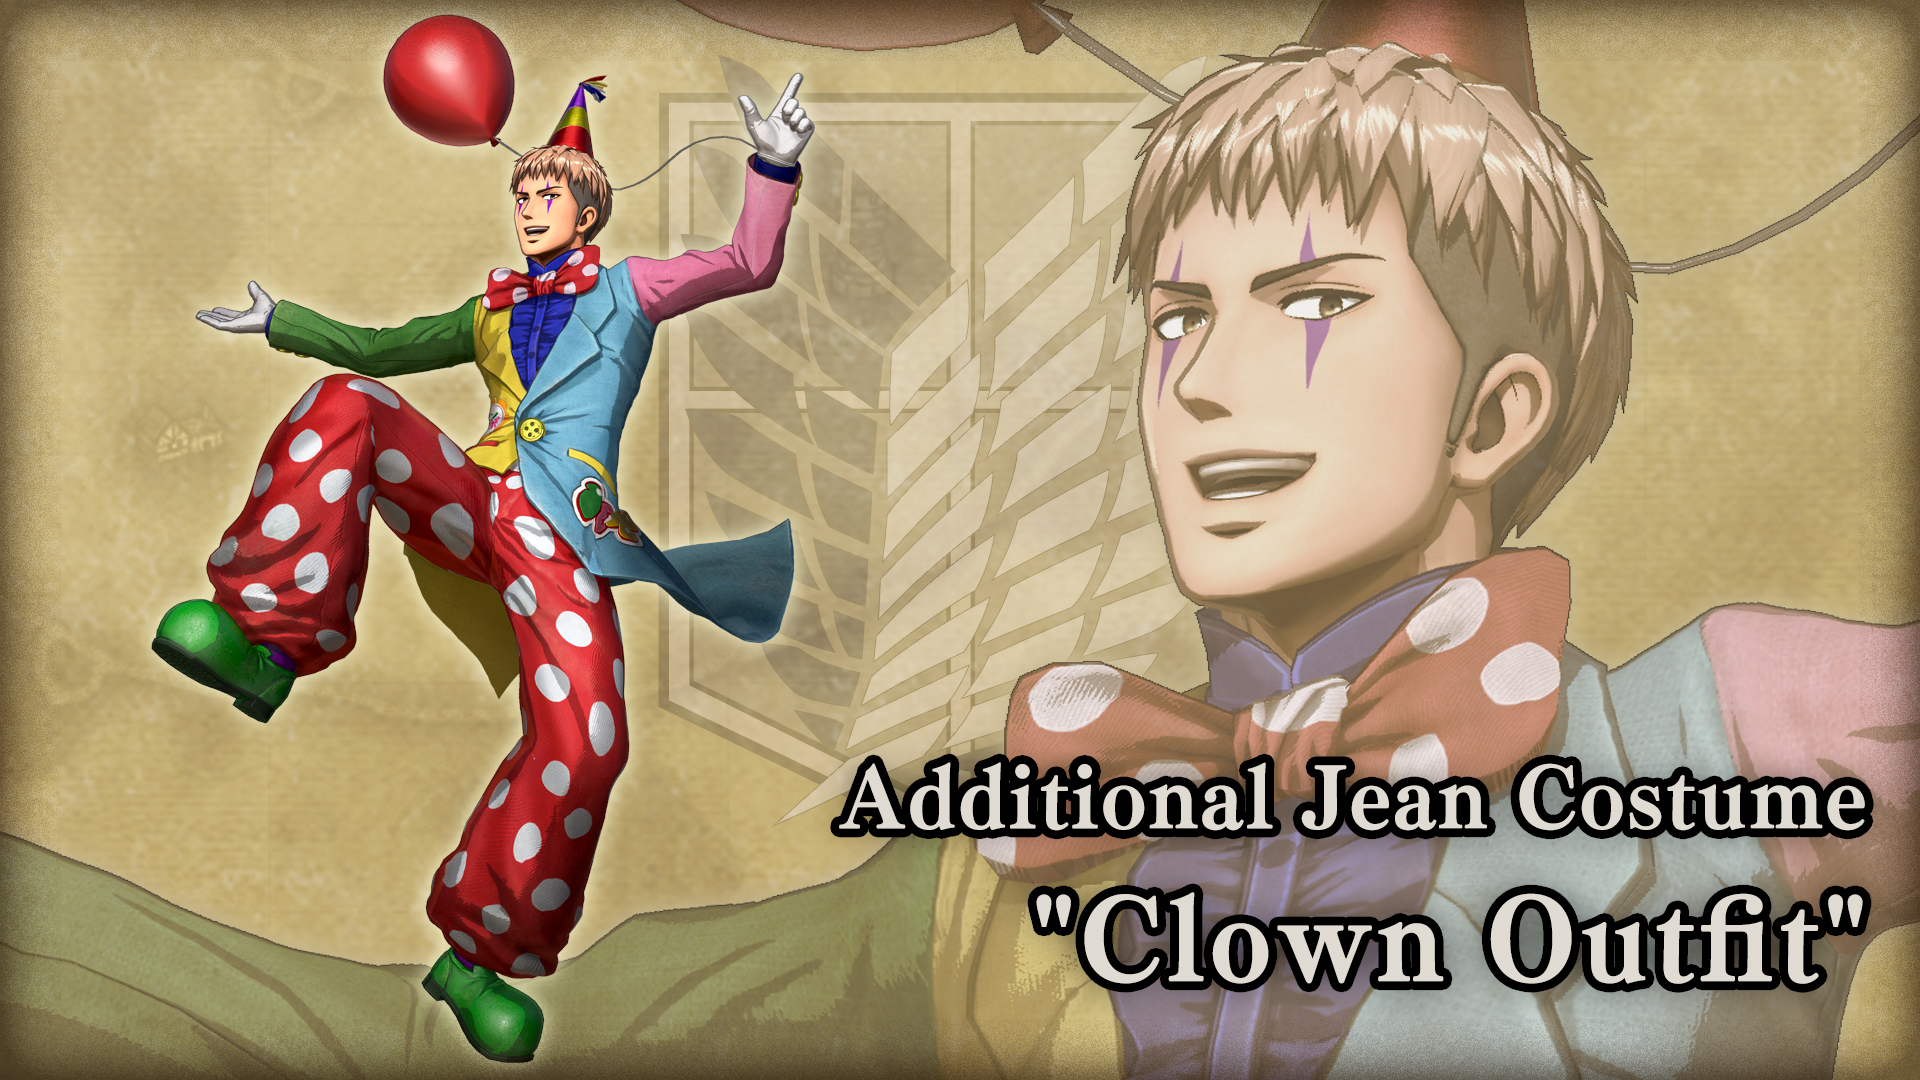 Additional Jean Costume: "Clown Outfit"